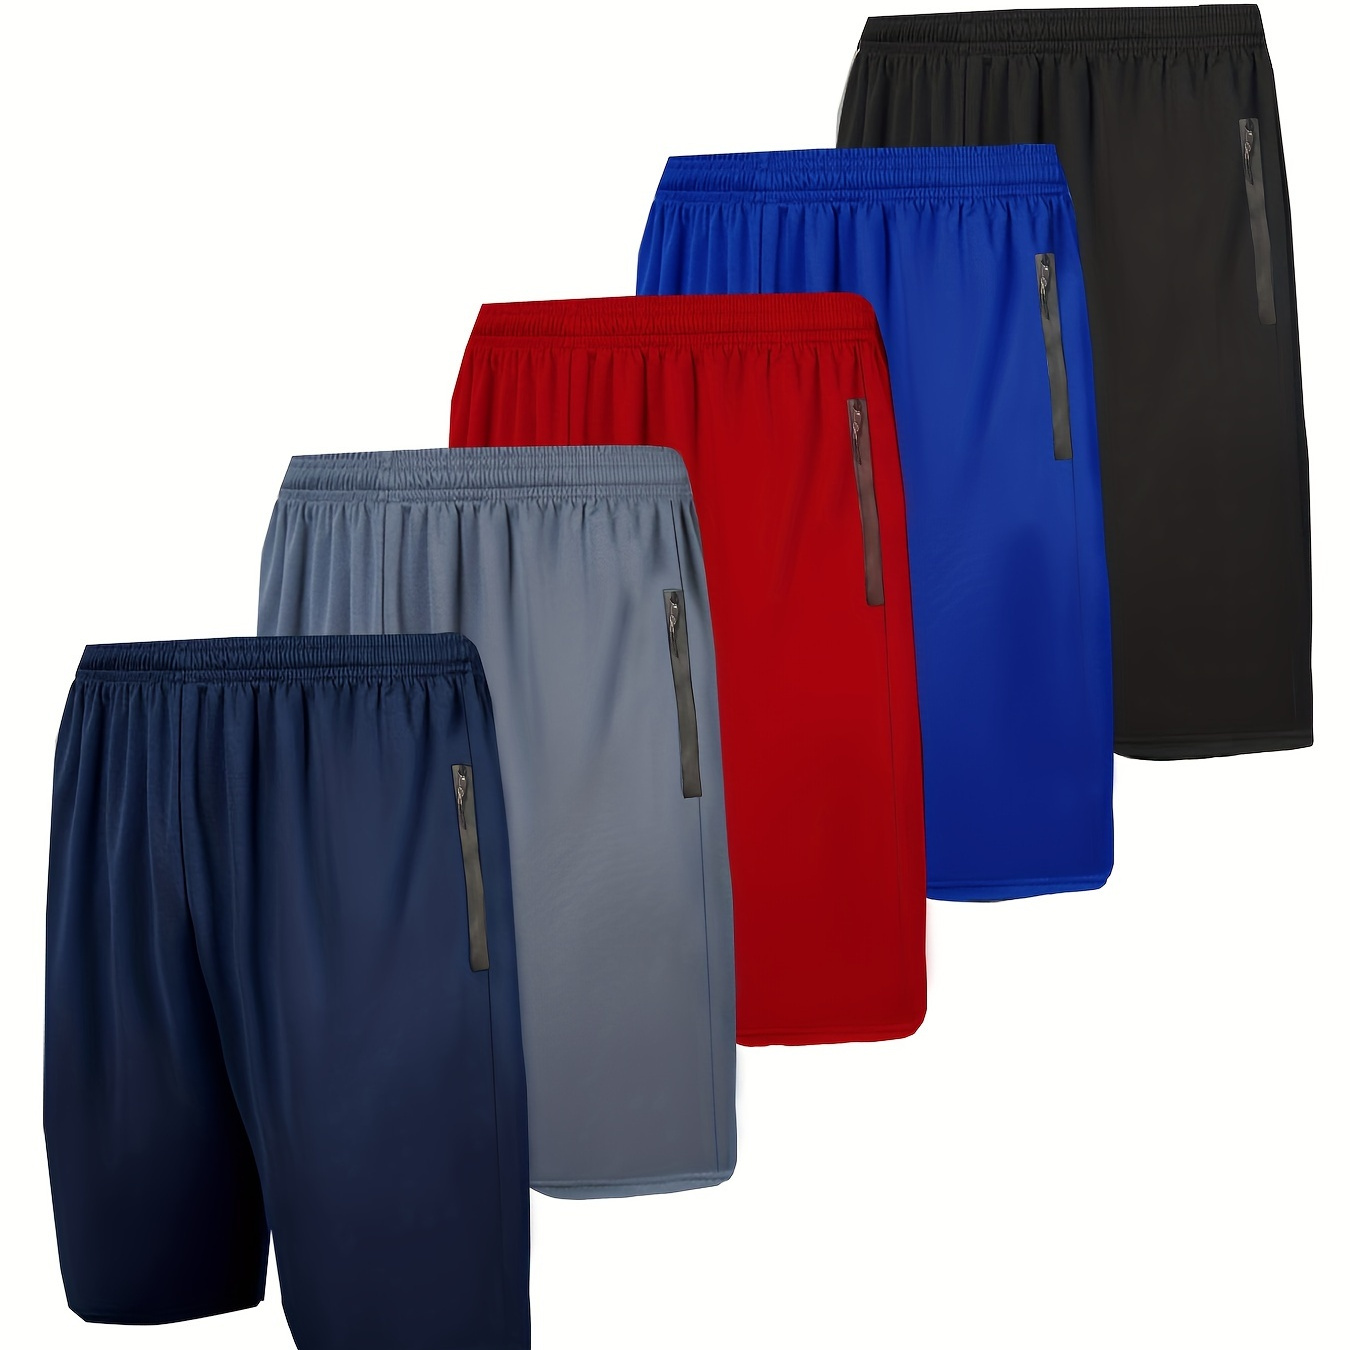 

5pcs Men's Zipper Pockets Active Shorts, Chic Stretch Quick Drying Comfy Breathable Sports Shorts For Basketball Fitness